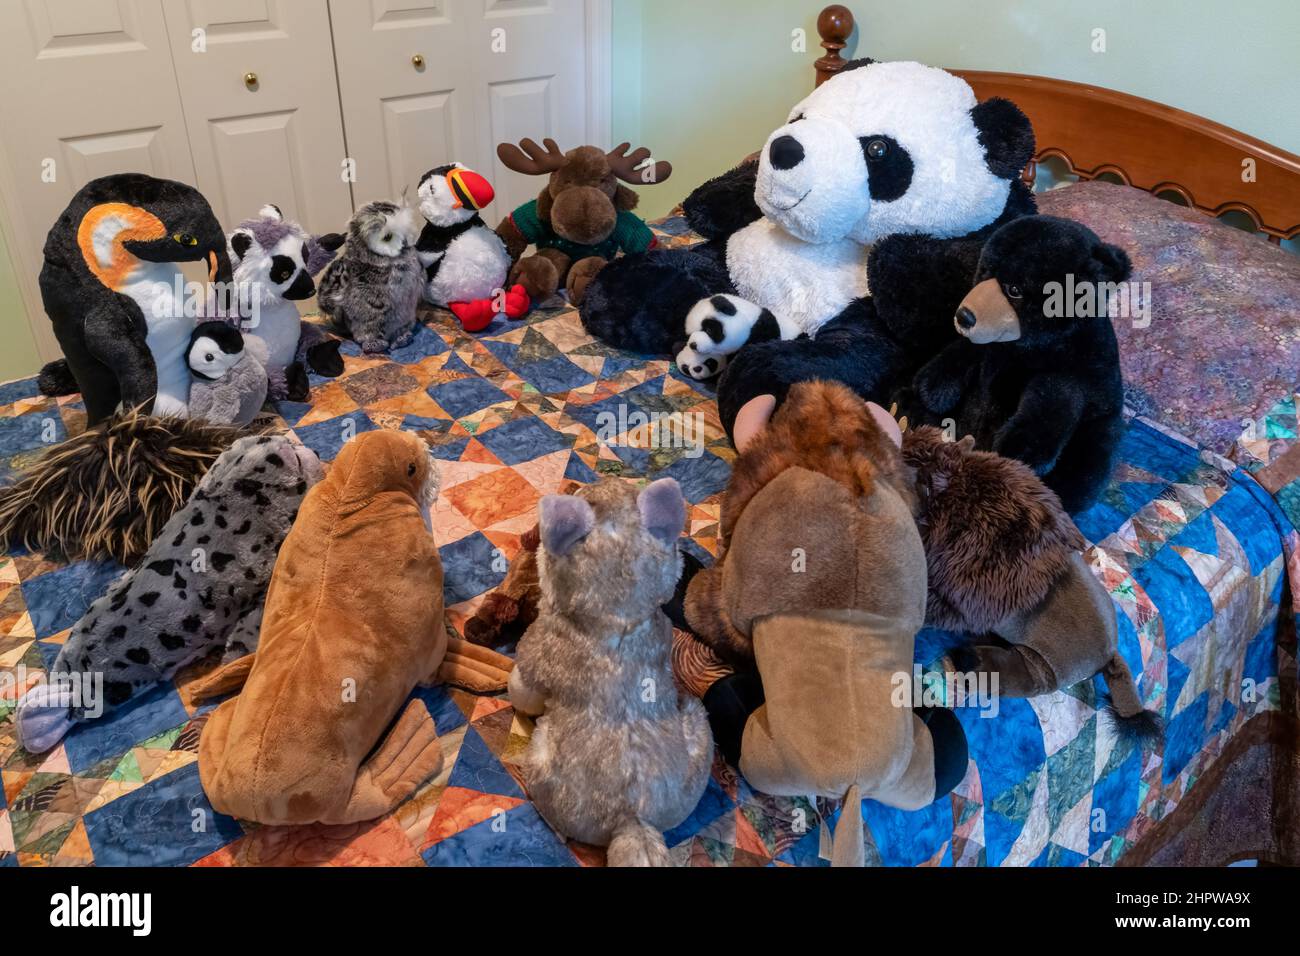 Stuffed animals gathered for story-telling time on a bed. Stock Photo